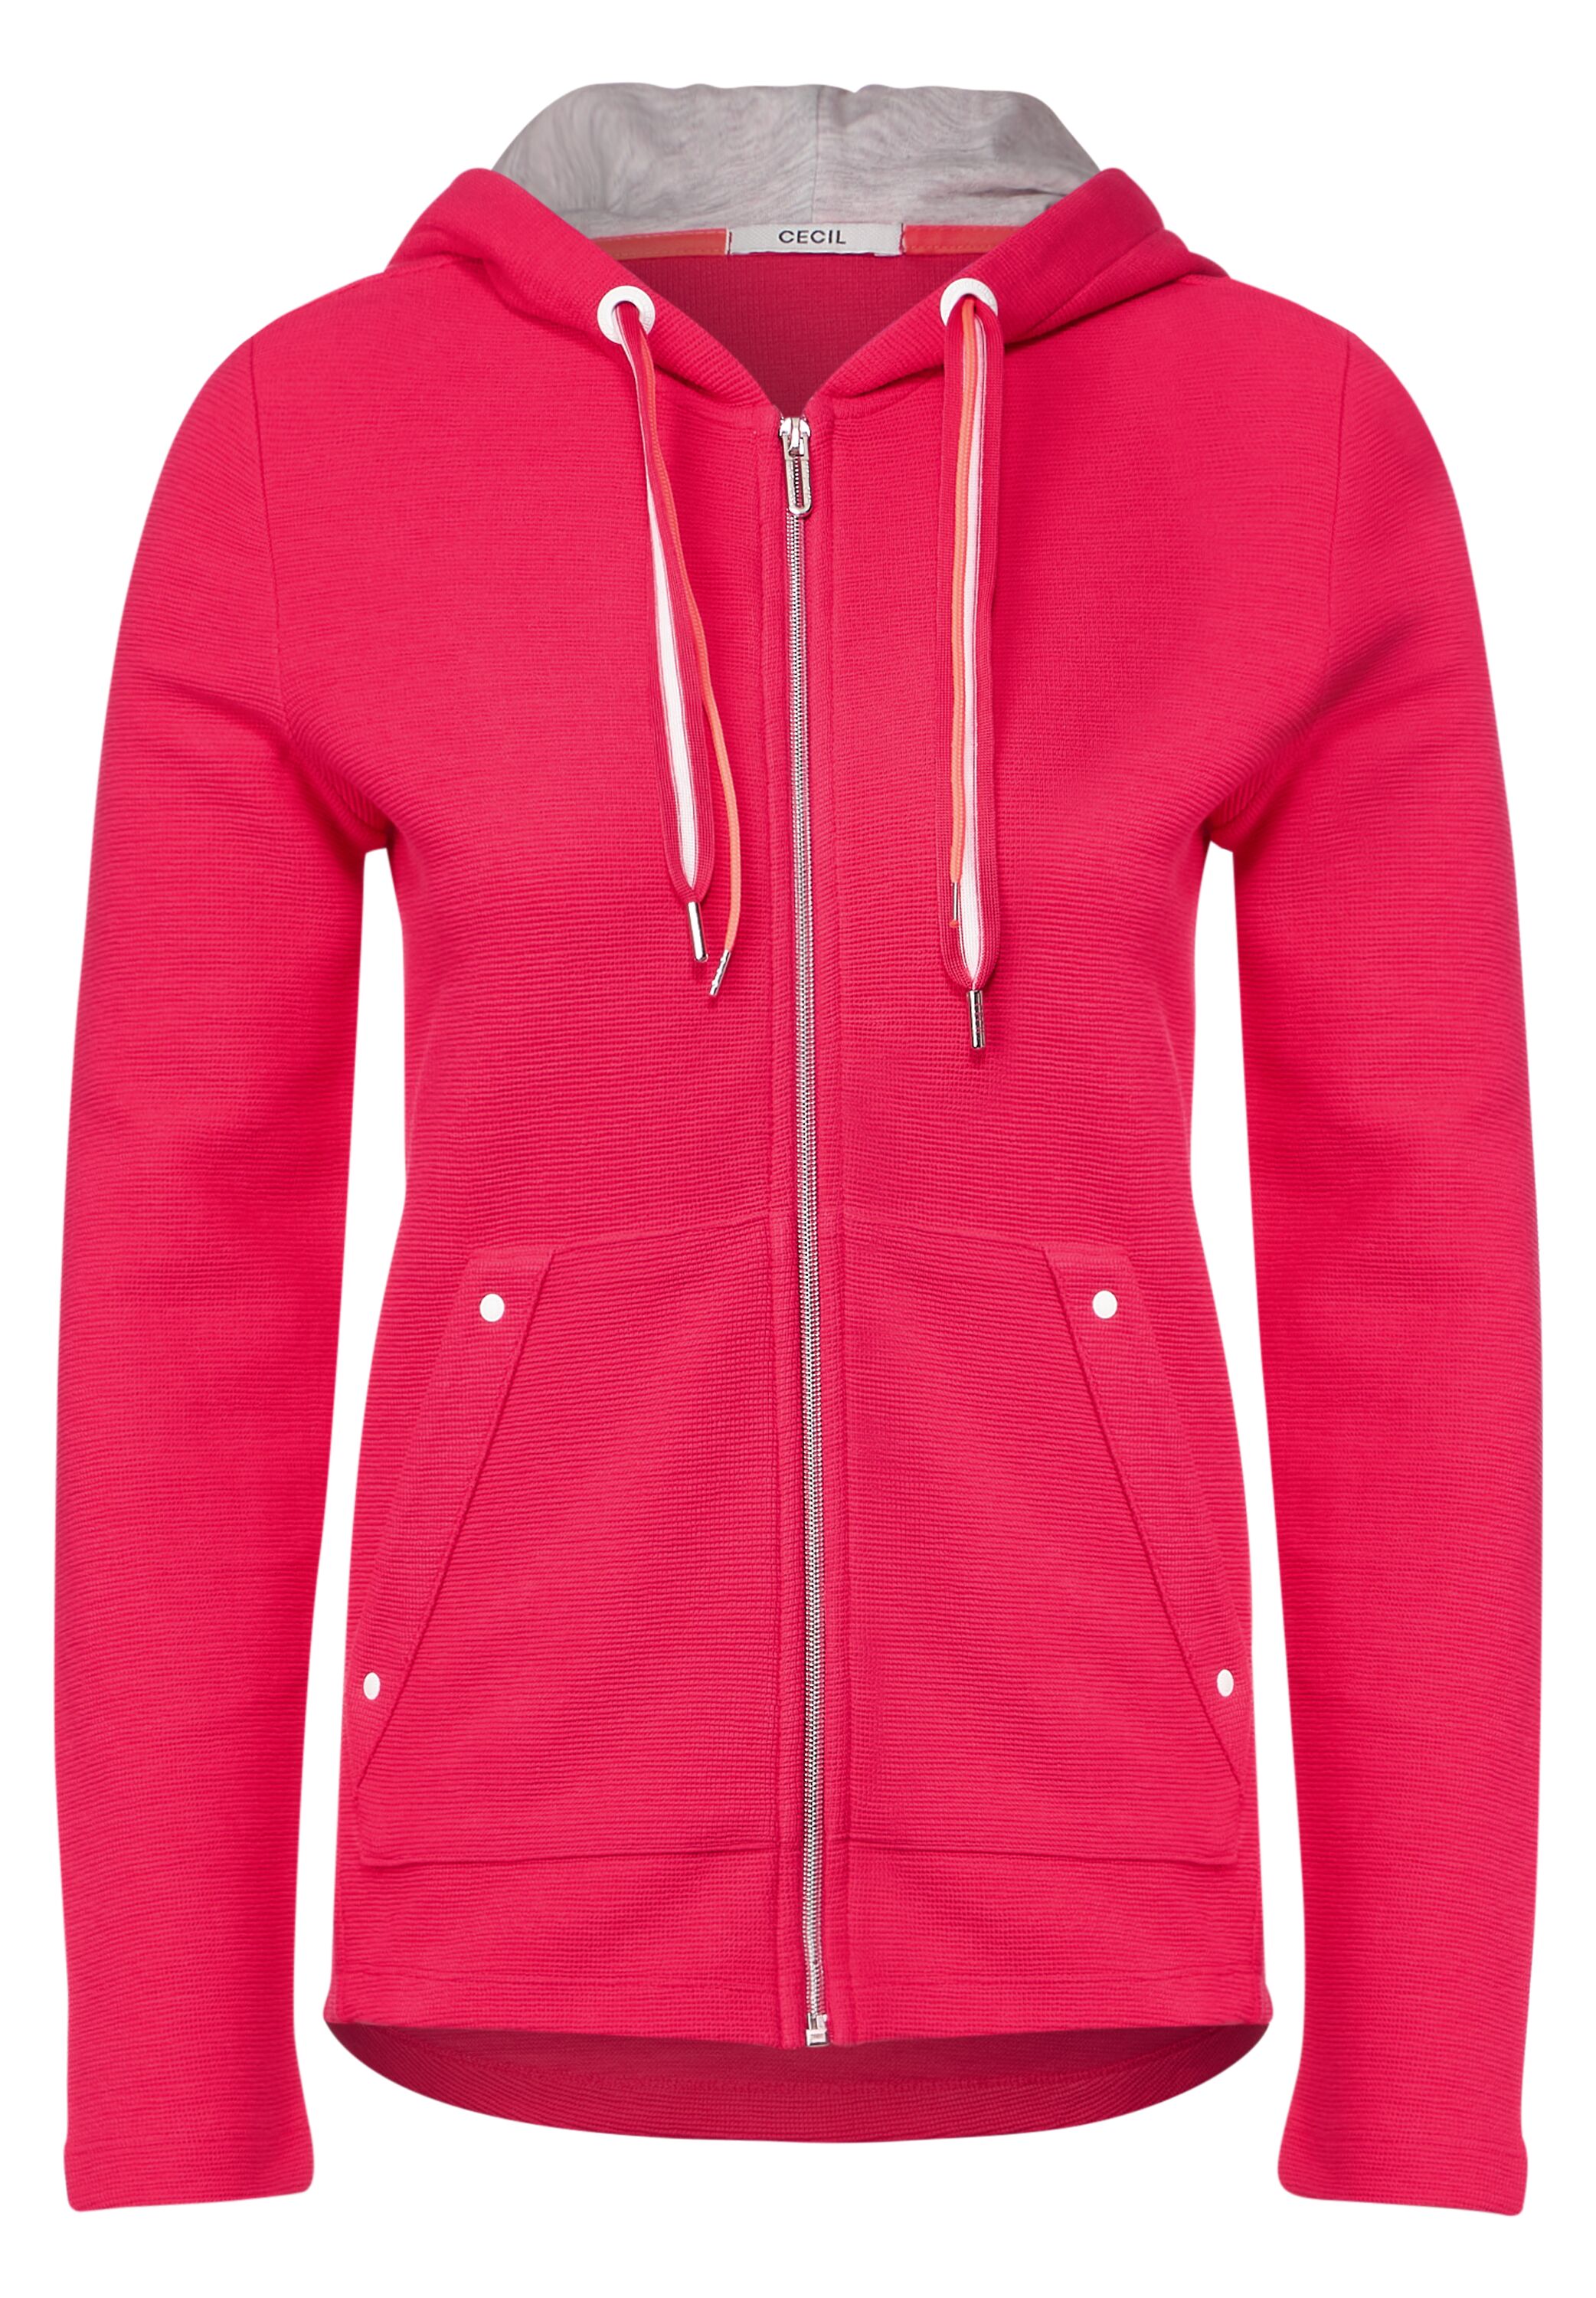 CECIL Shirtjacke in Strawberry Mode - reduziert B319398-14472 im CONCEPT SALE Red